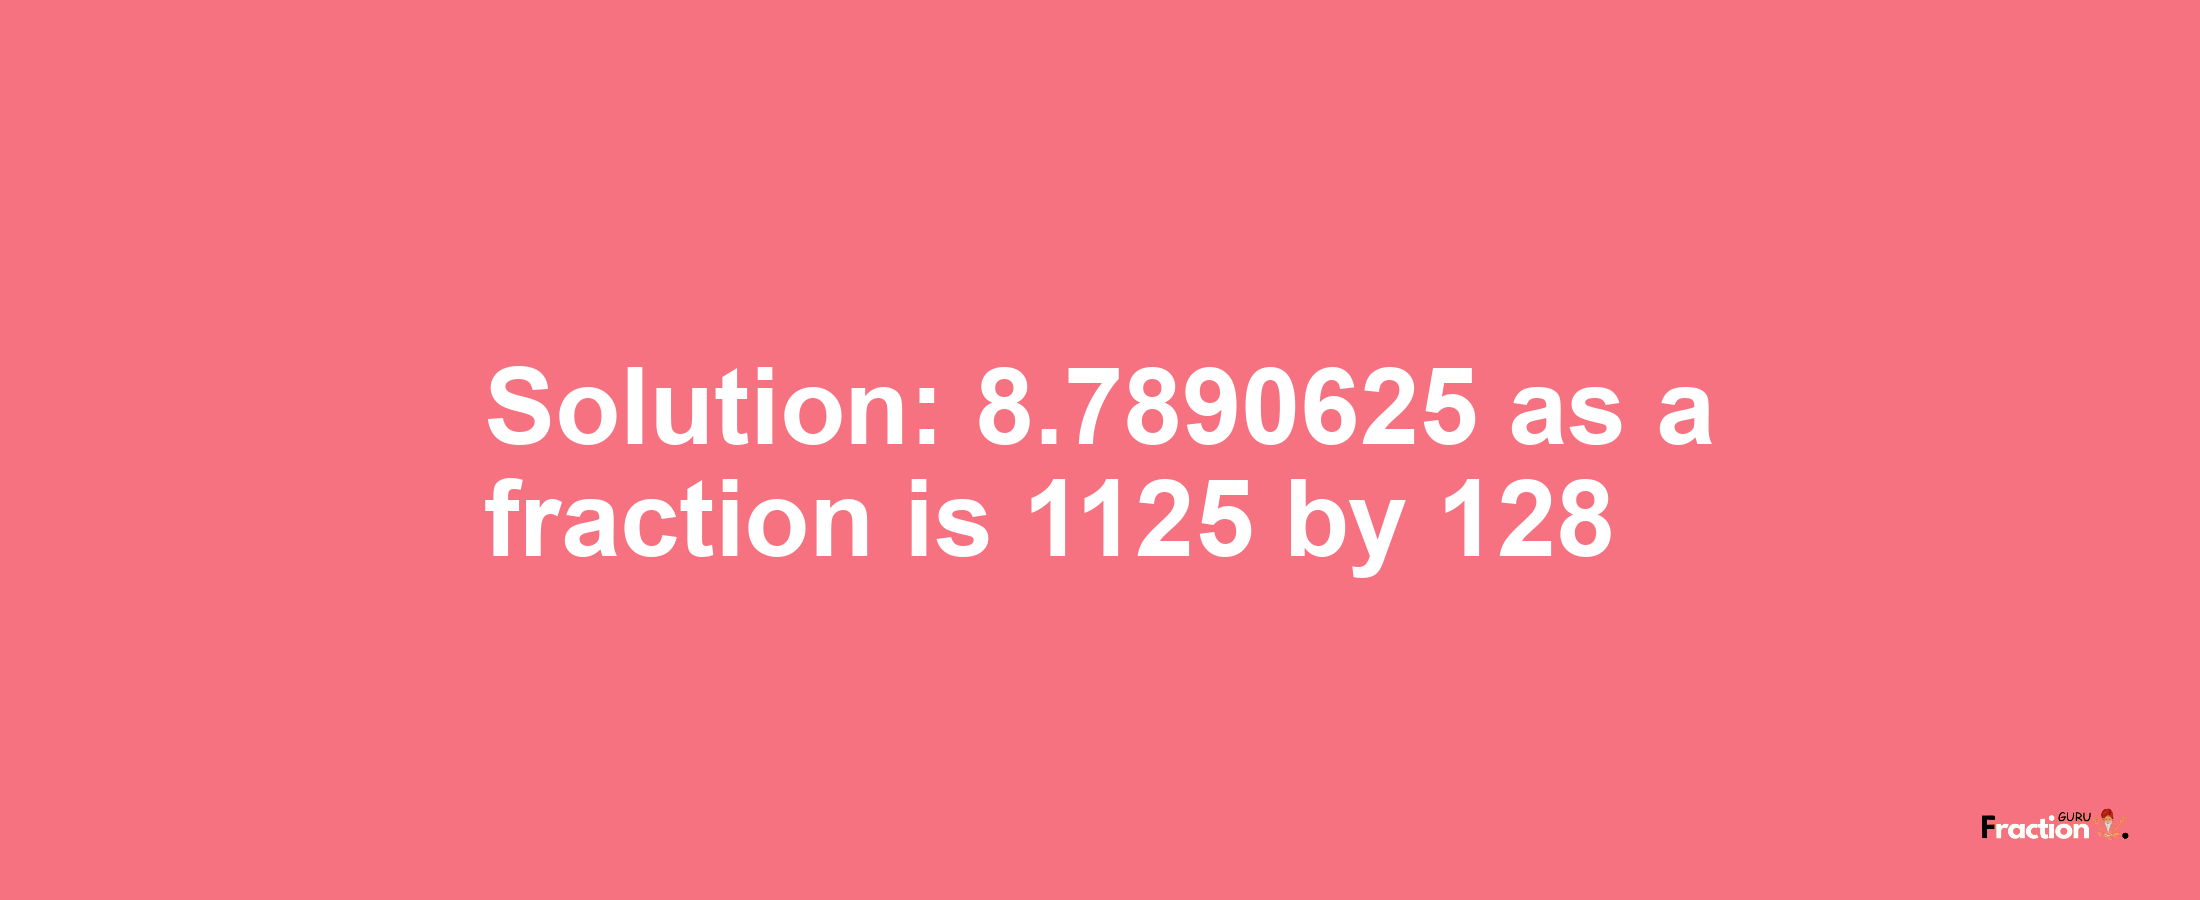 Solution:8.7890625 as a fraction is 1125/128